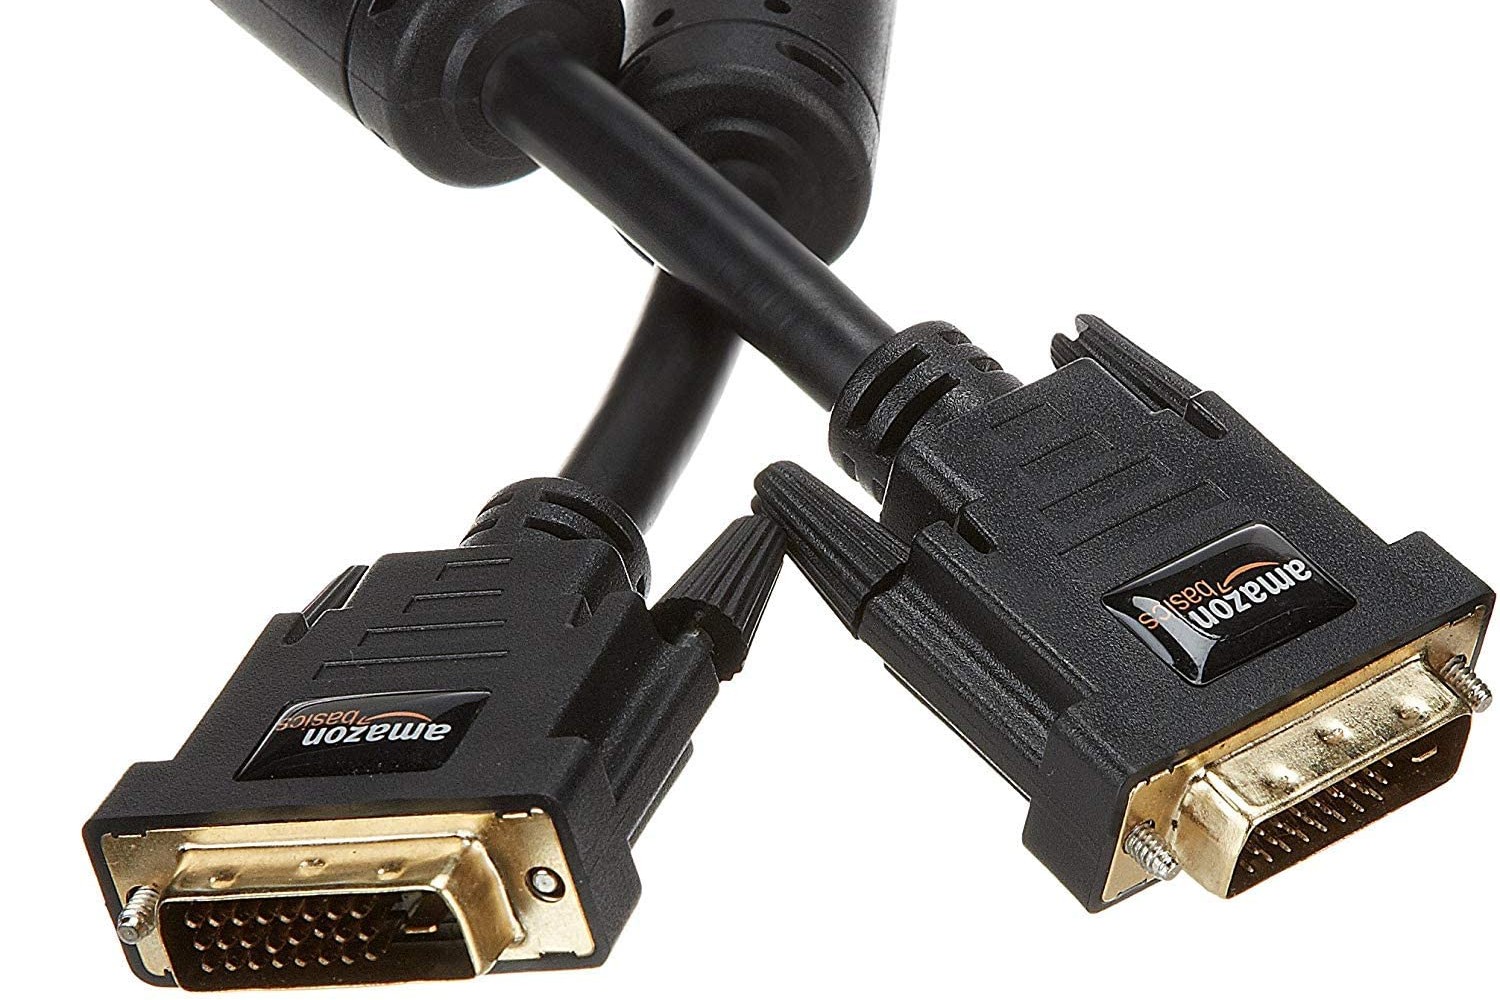 Learn About HDMI to DVI Cables: Their Qualities And Uses